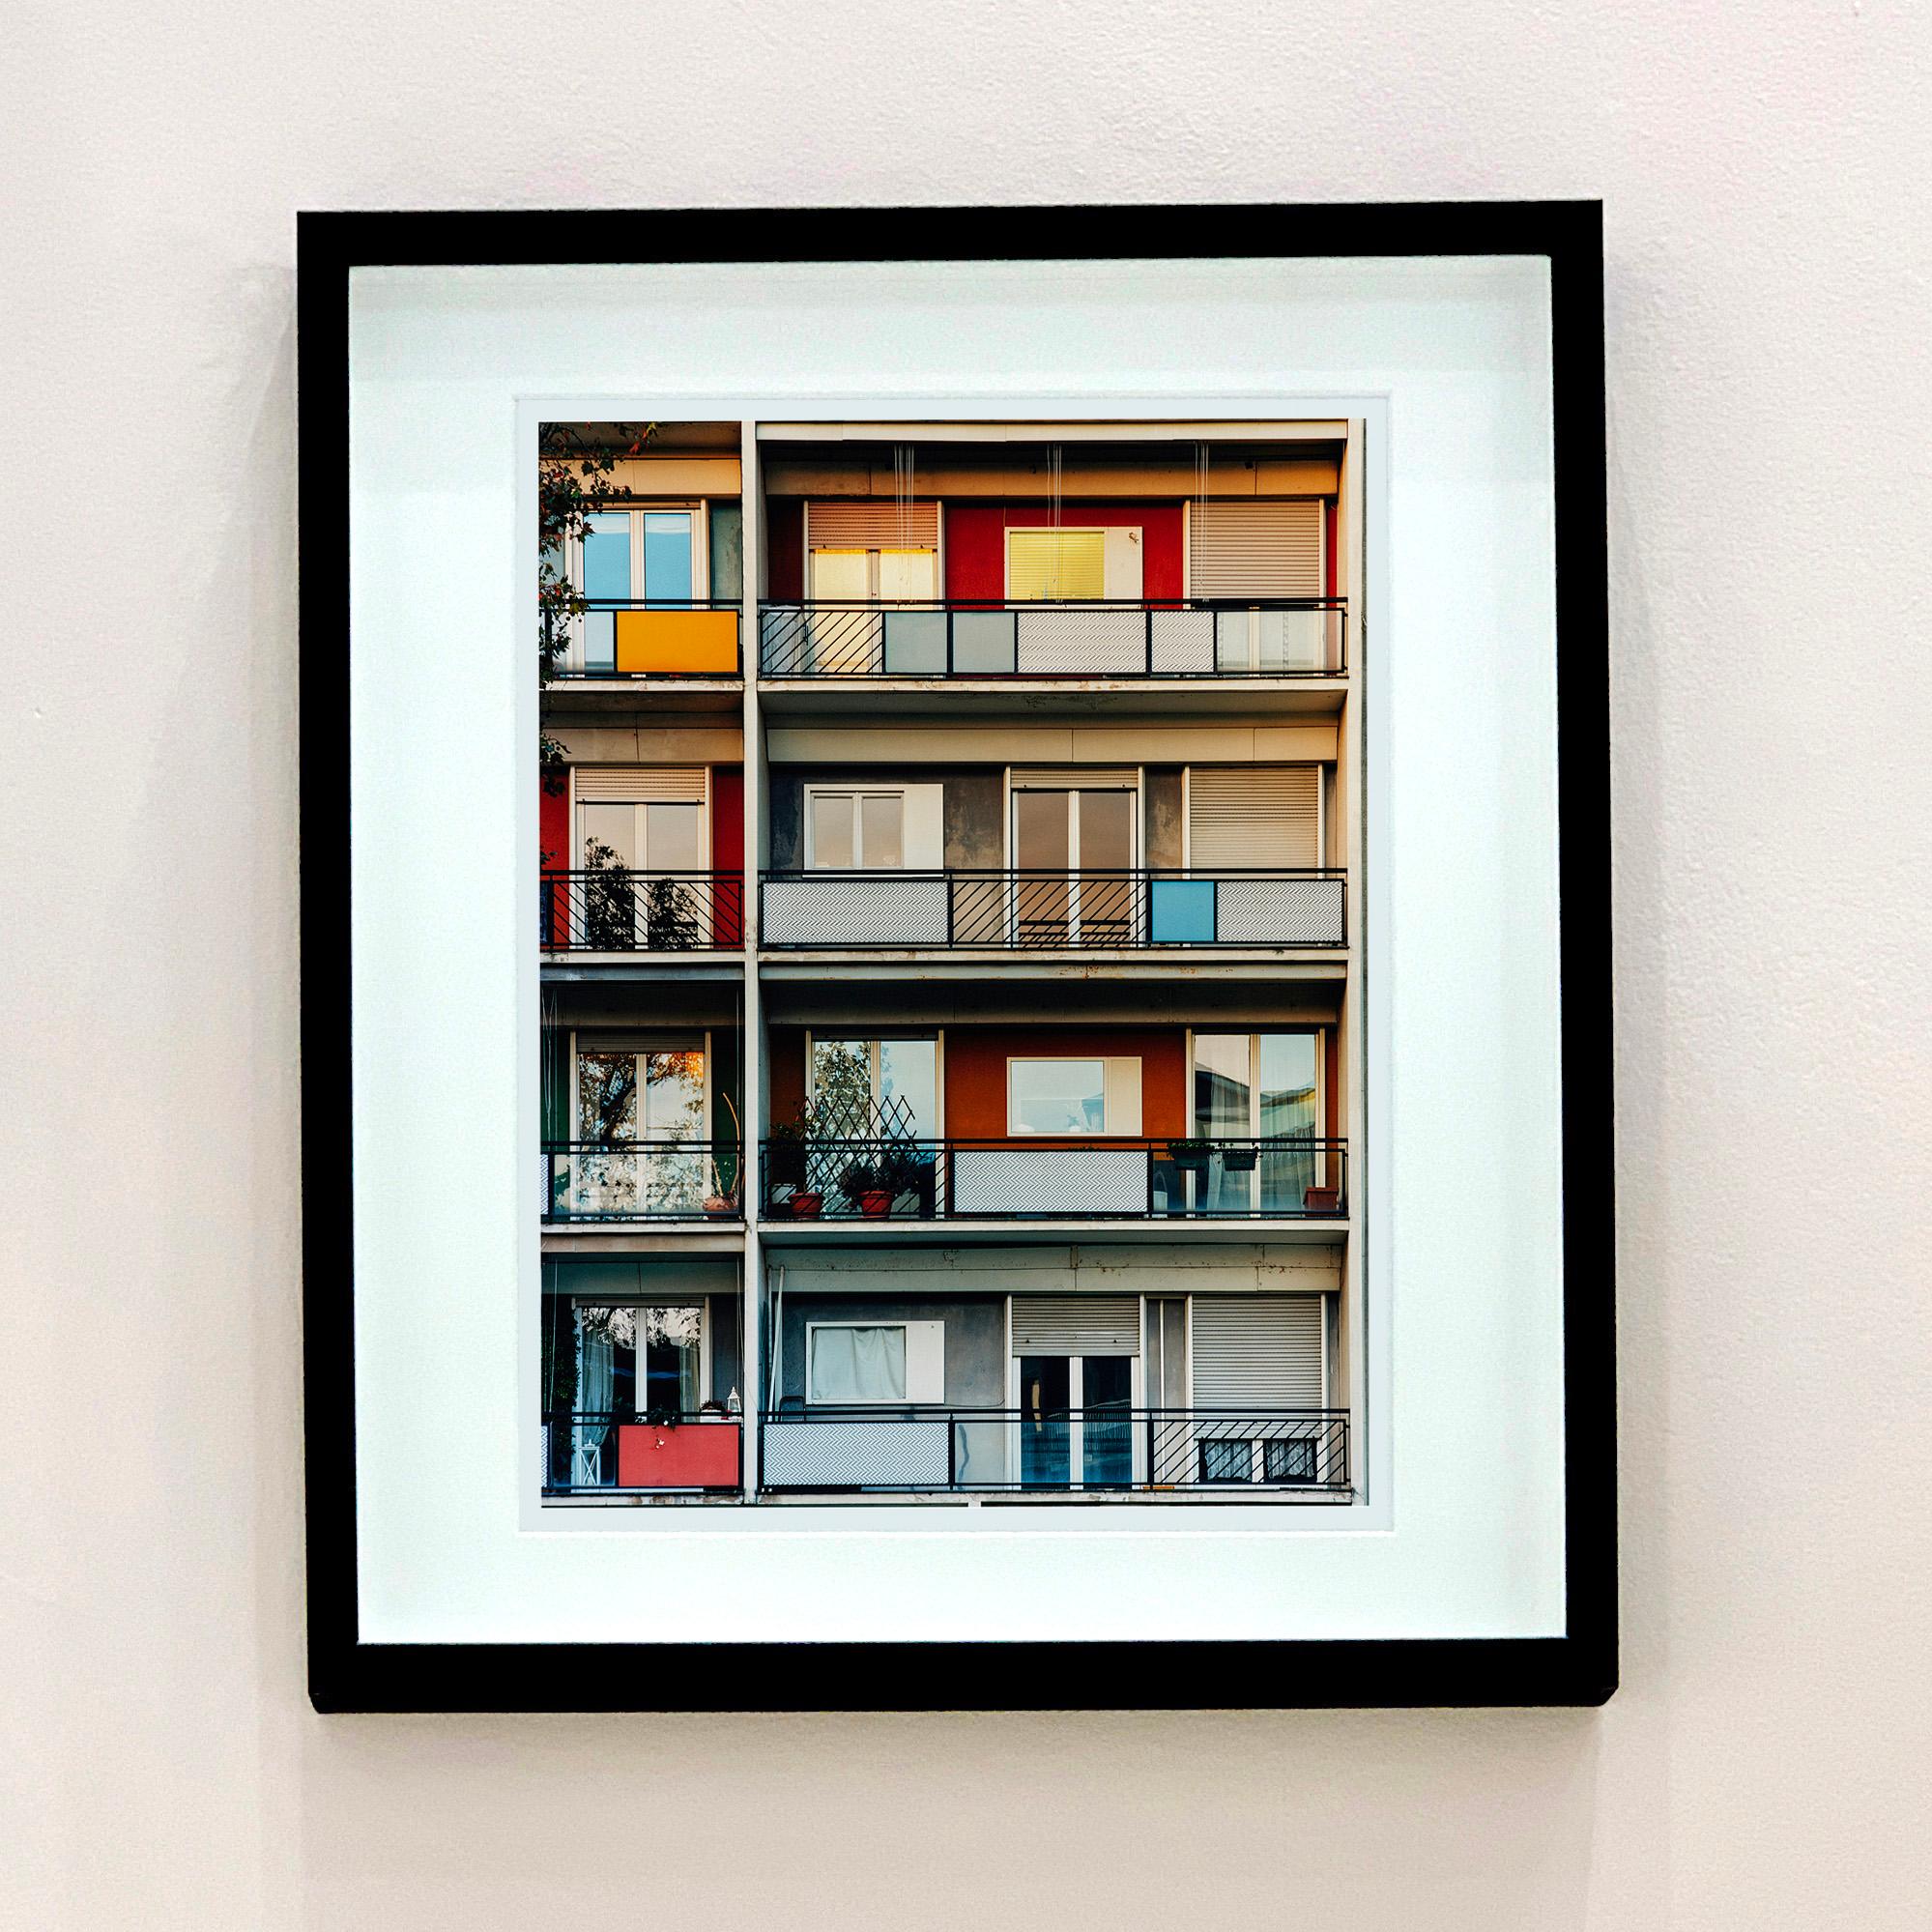 49 Via Dezza at Sunset, Gio Ponti Italian architecture photograph from Richard Heeps series A Short History of Milan. 

A Short History of Milan' began in November 2018 for a special project featuring at the Affordable Art Fair Milan 2019 and the